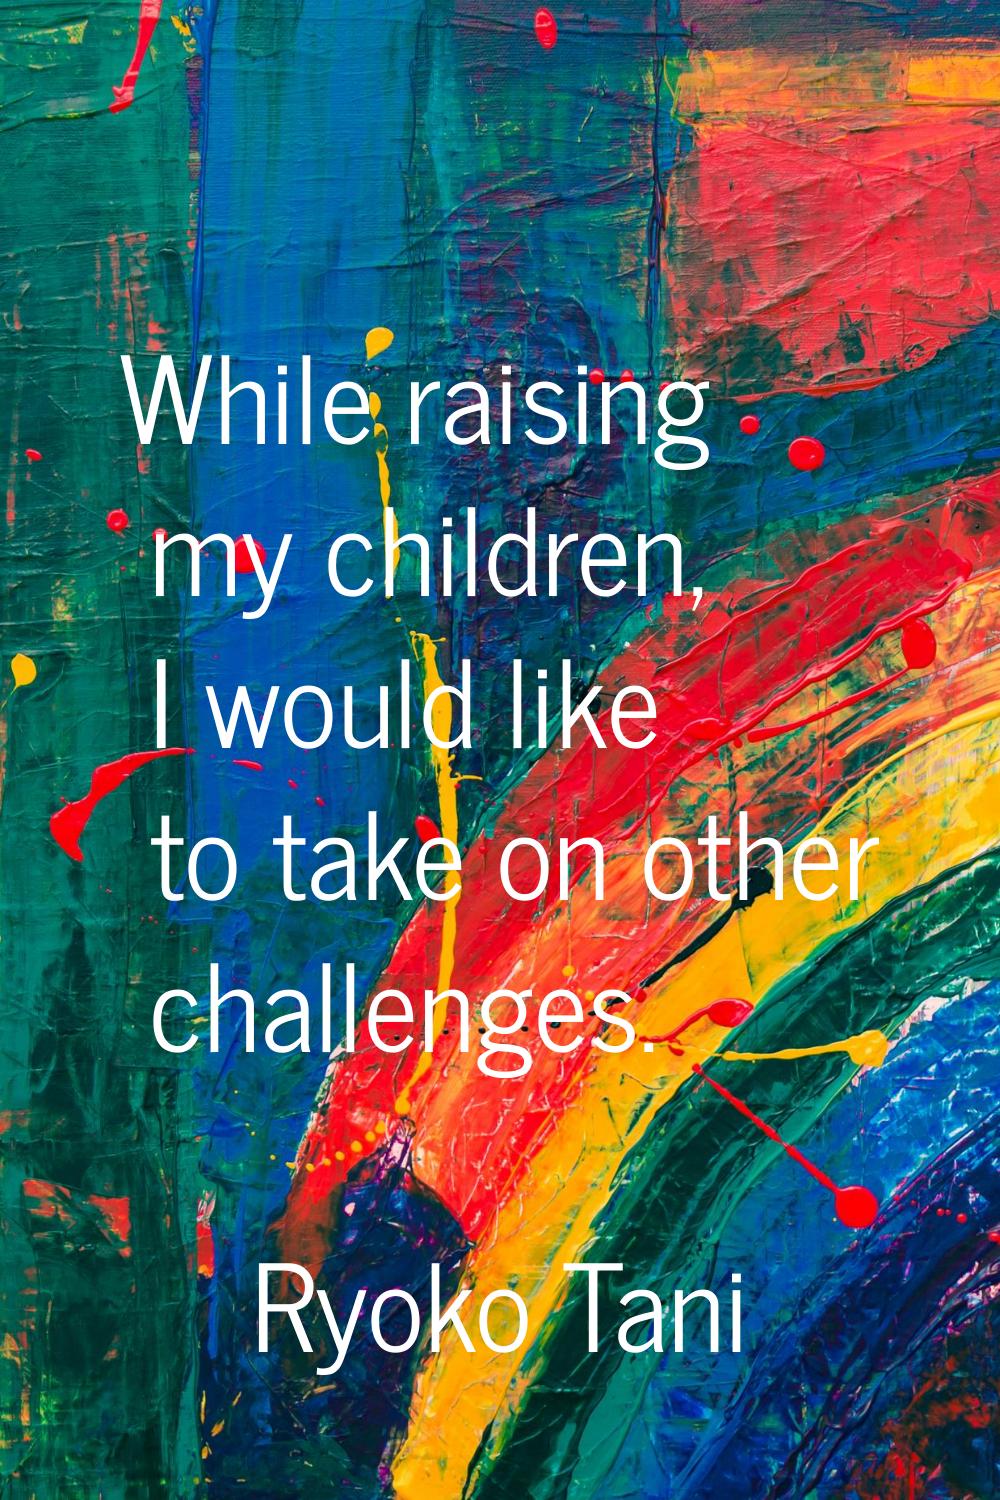 While raising my children, I would like to take on other challenges.